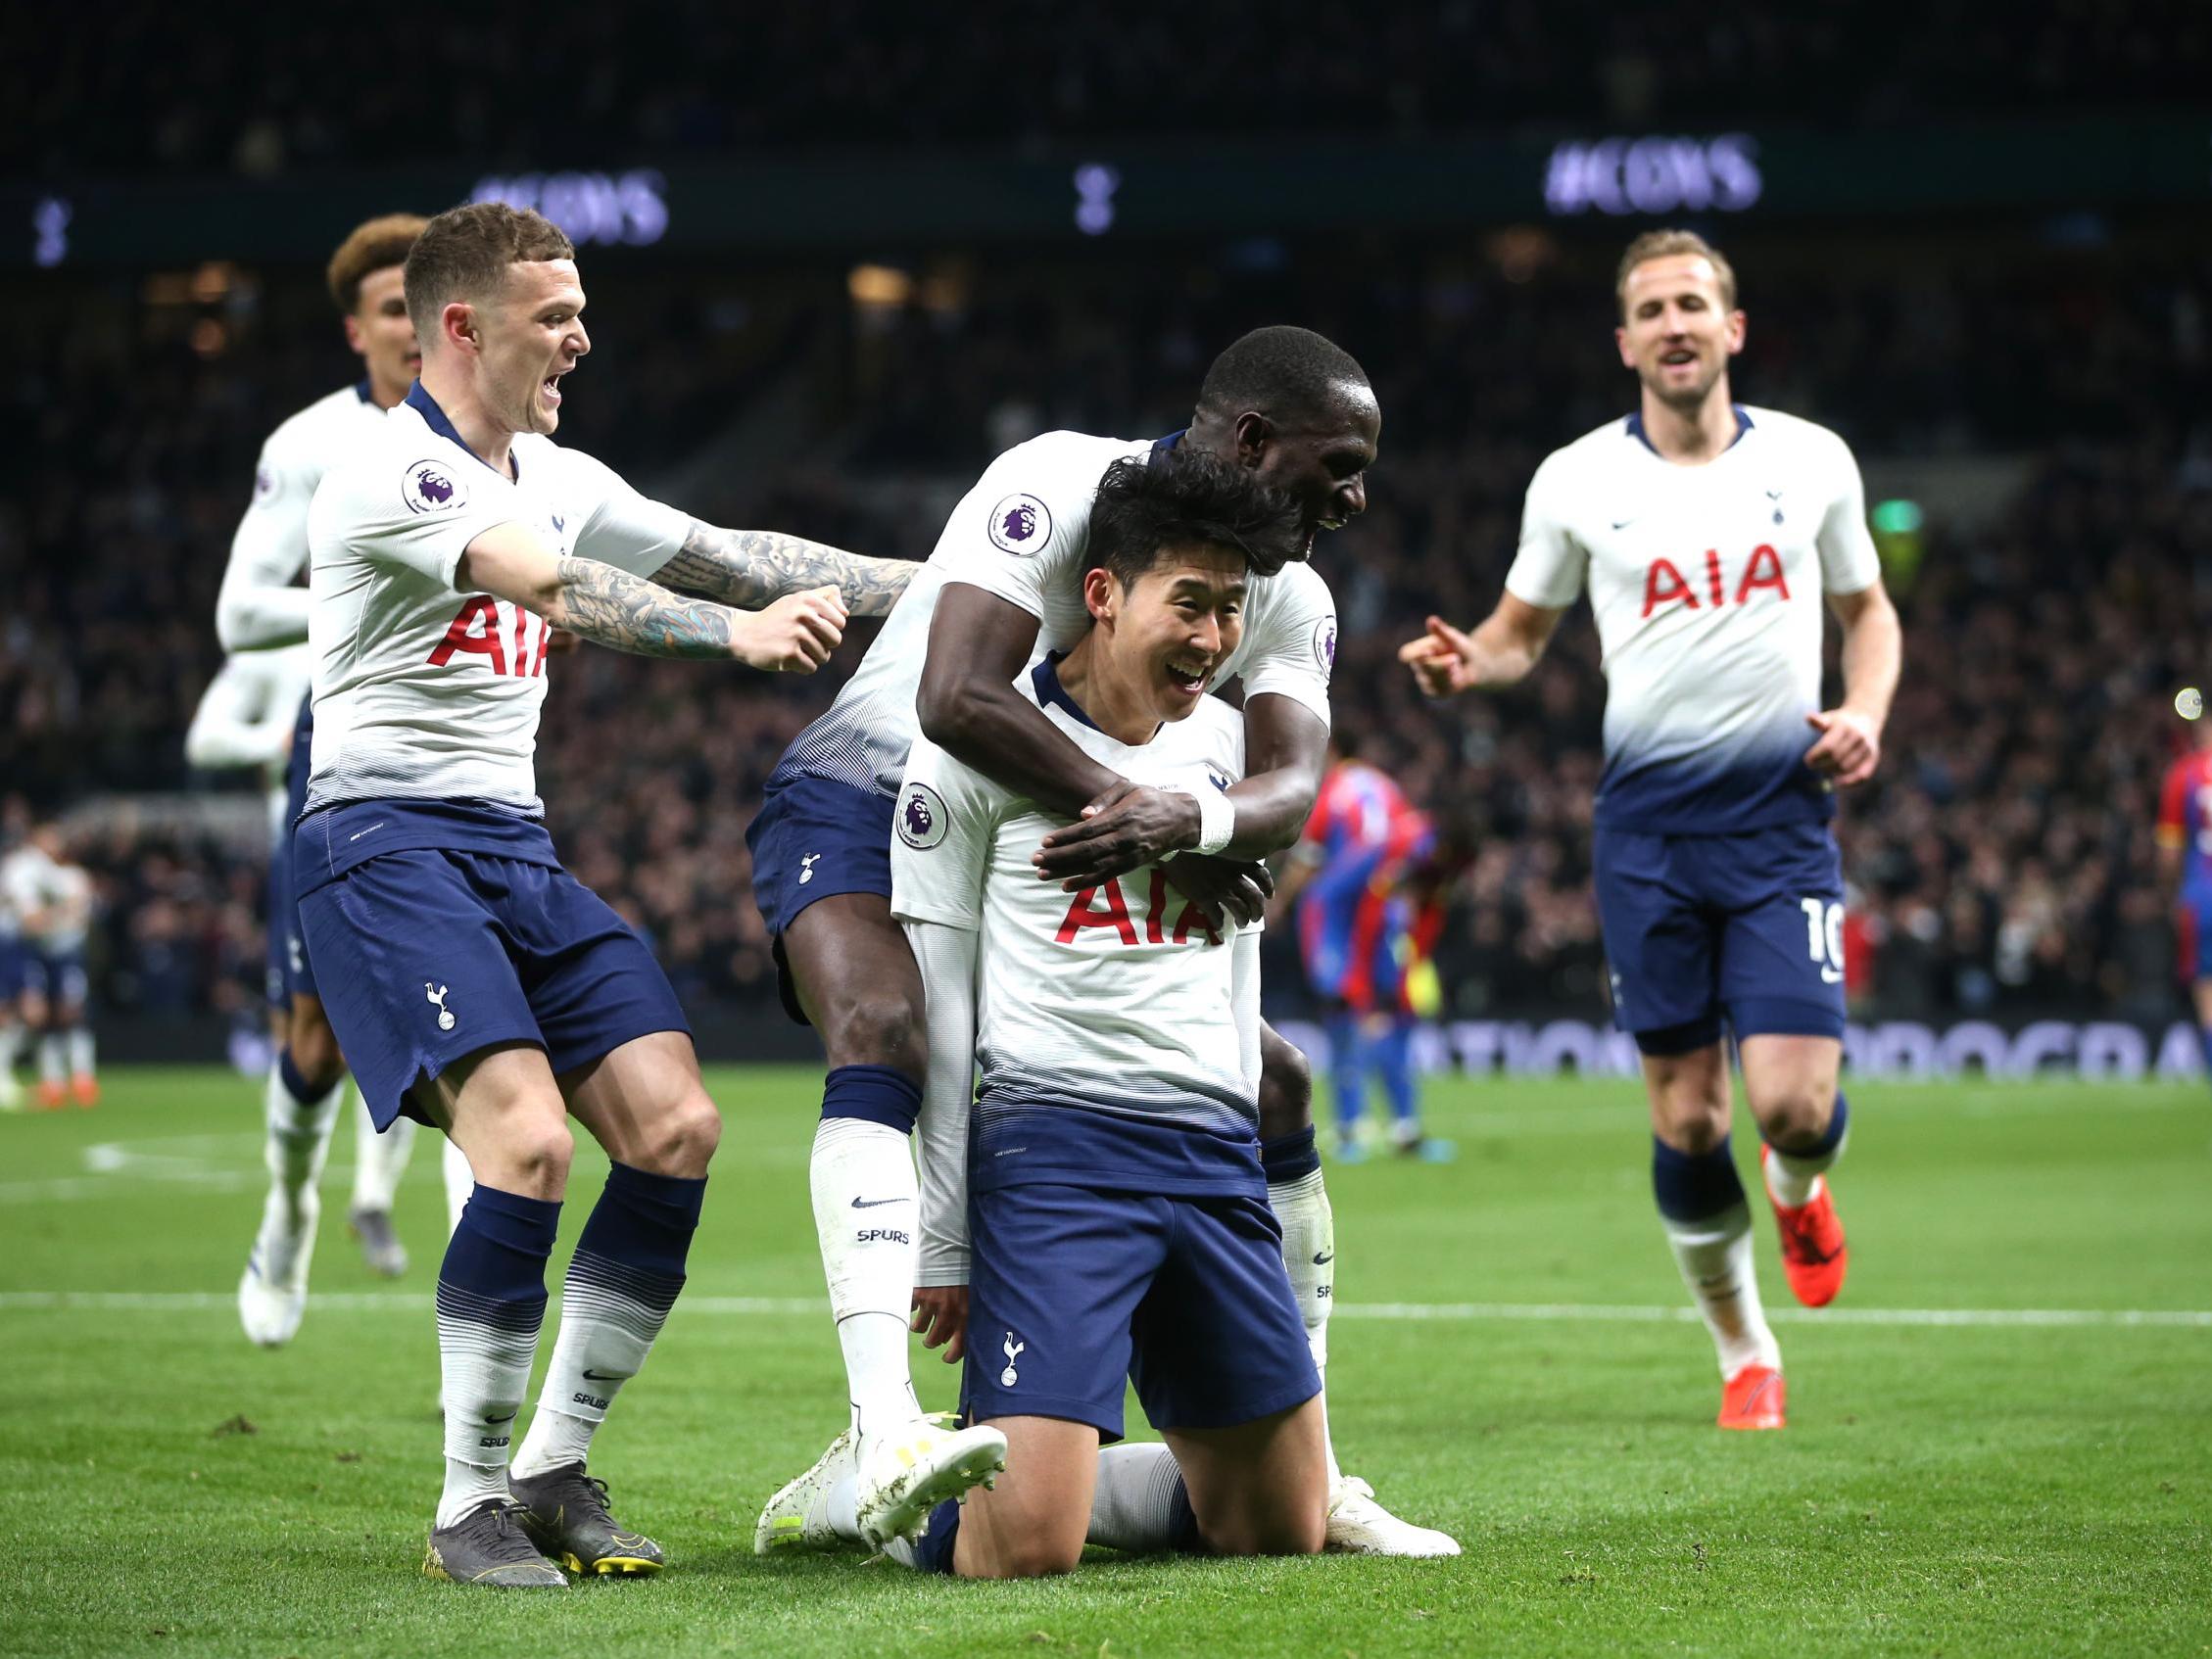 Tottenham mark new chapter with a win as Heung-Min Son and Christian Eriksen combine to sink Crystal Palace